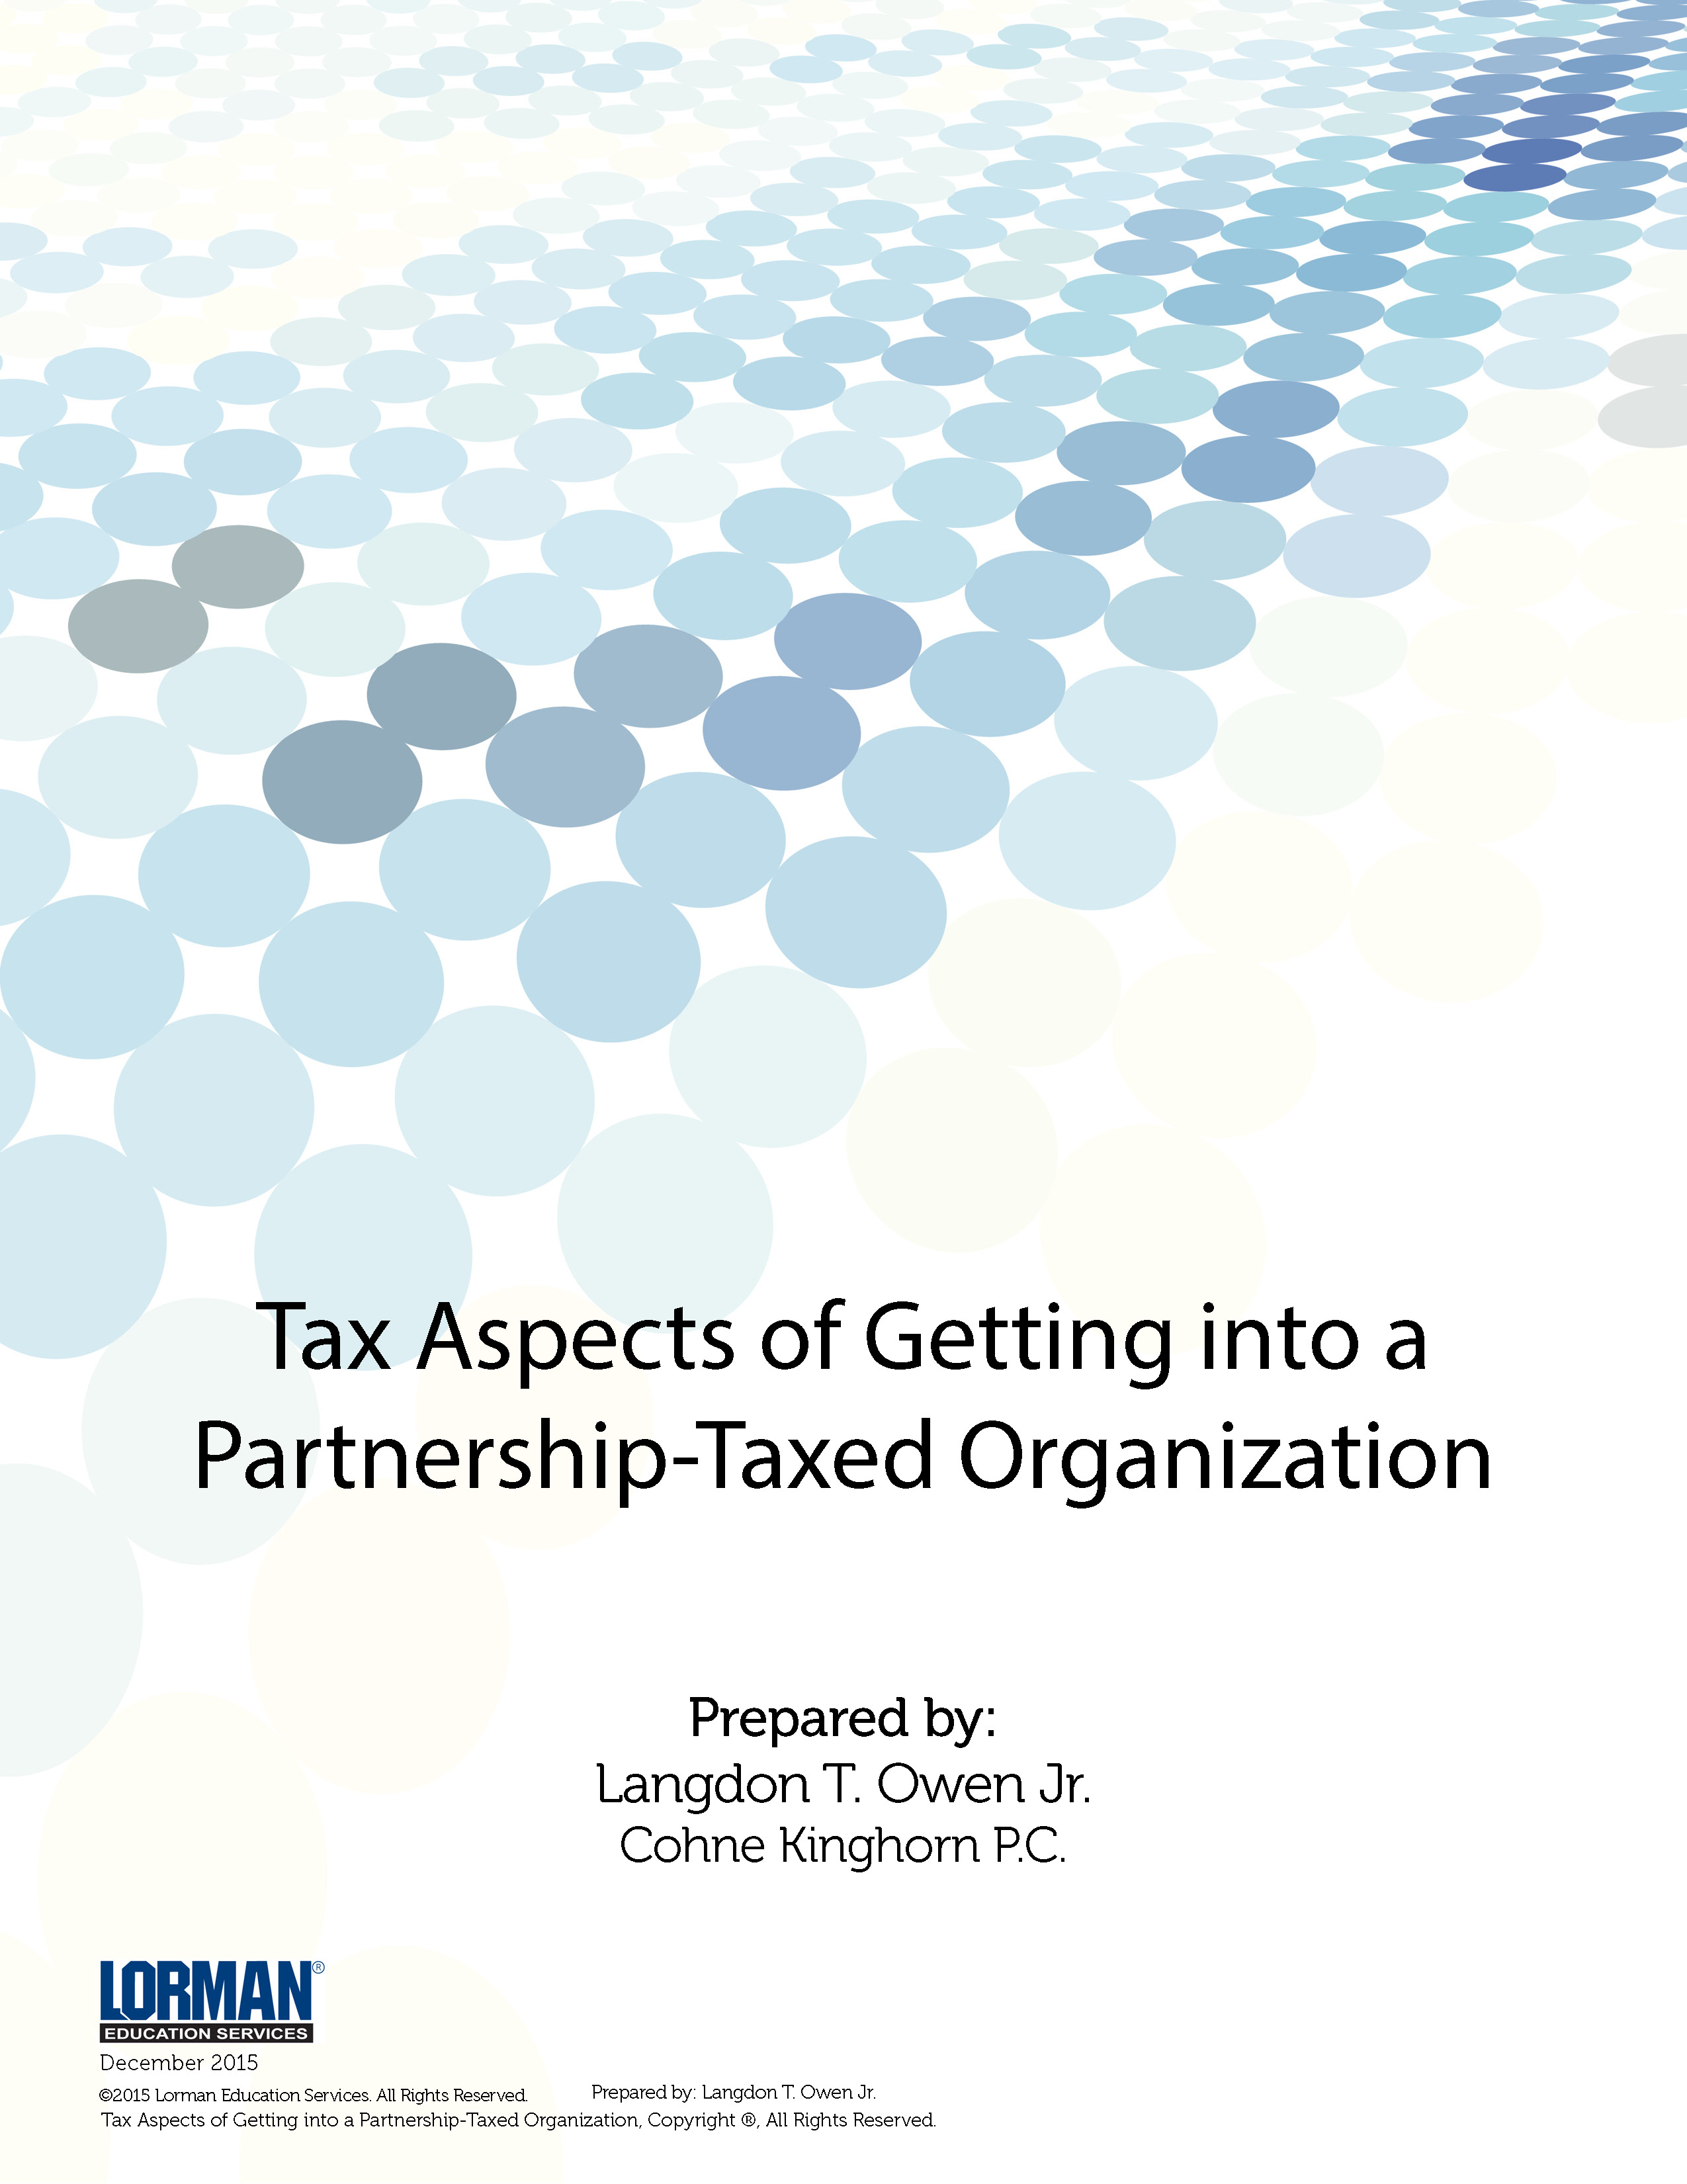 Tax Aspects of Getting into a Partnership-Taxed Organization